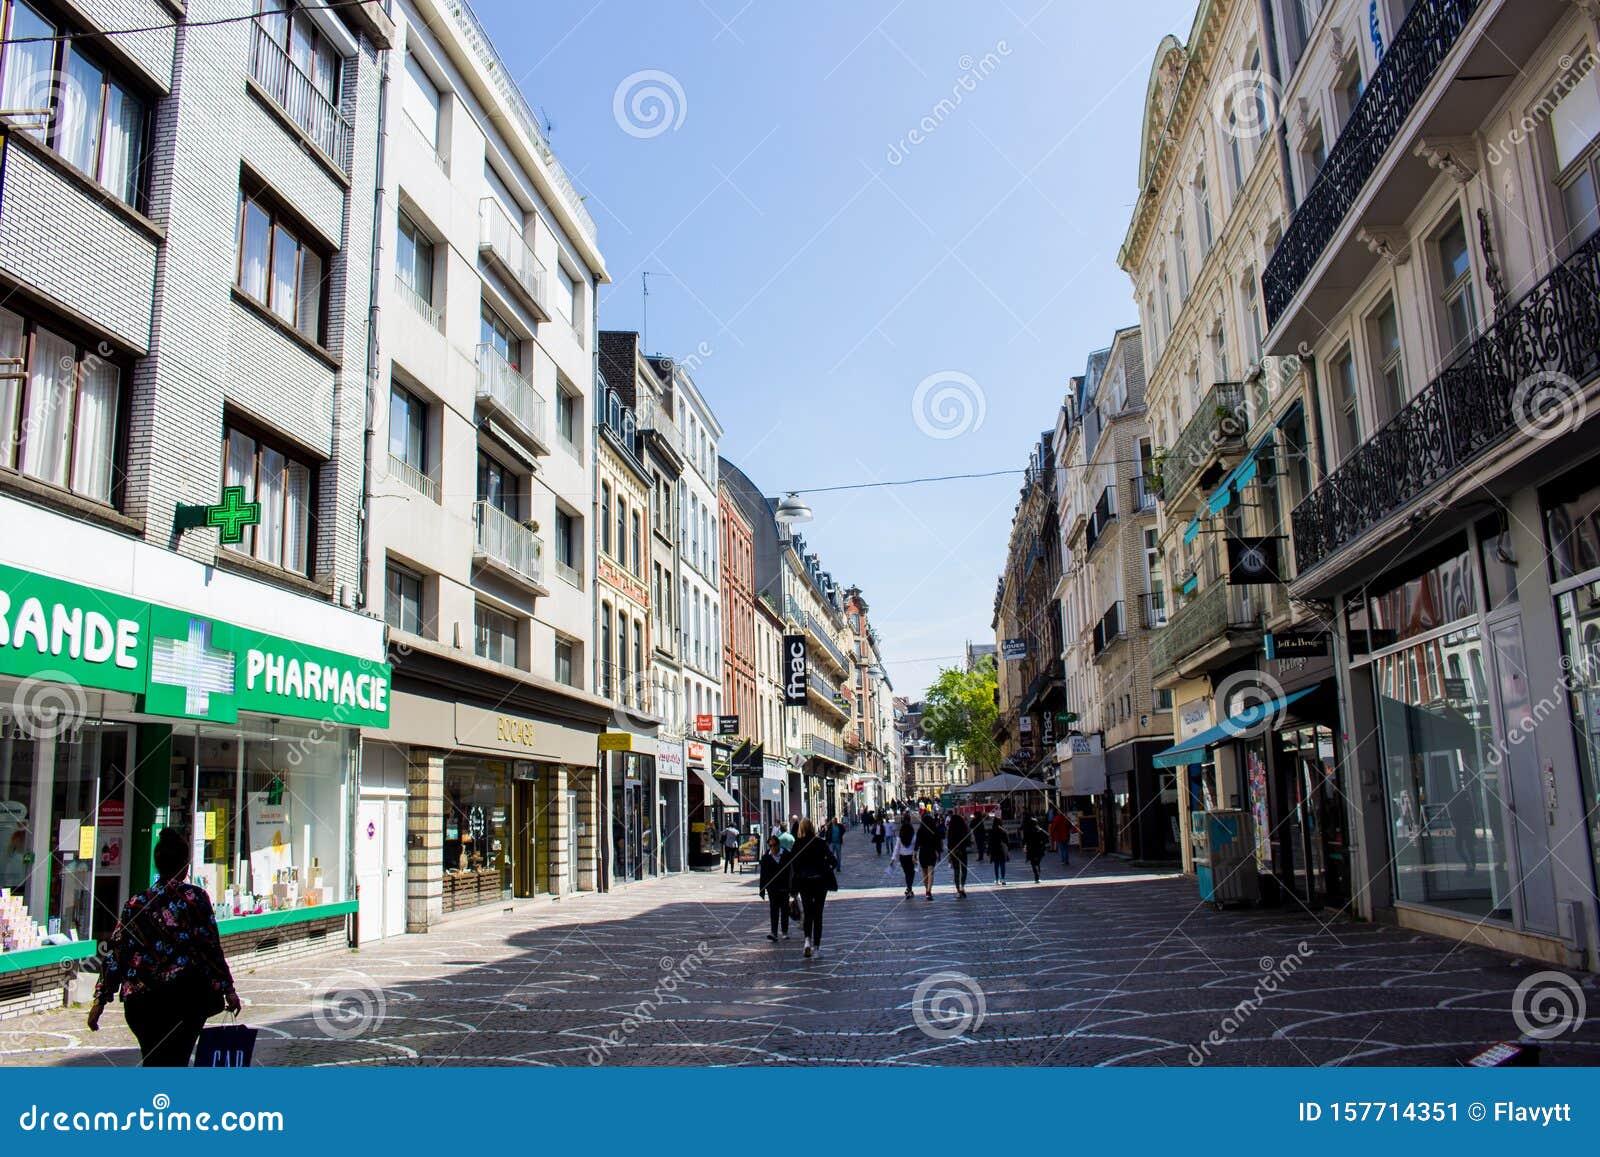 People Walking on the Streets of Lille, France Editorial Photo - Image ...